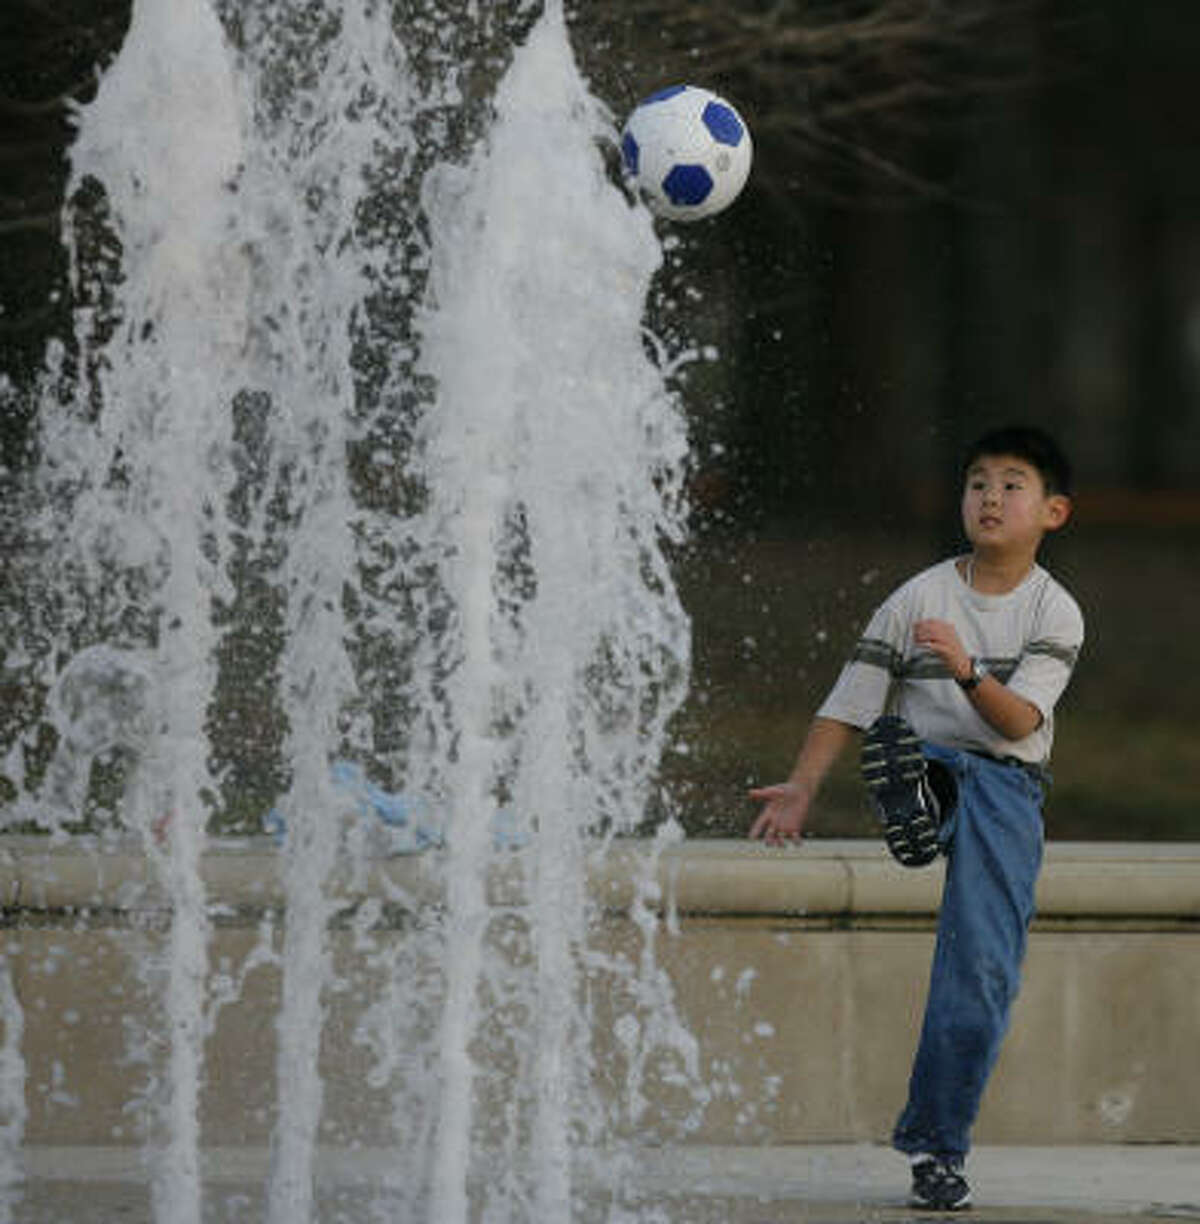 Paul Tan, age 10, tries to kick a soccer ball over a fountain in Hermann Park while enjoying some pleasant weather earlier this month.